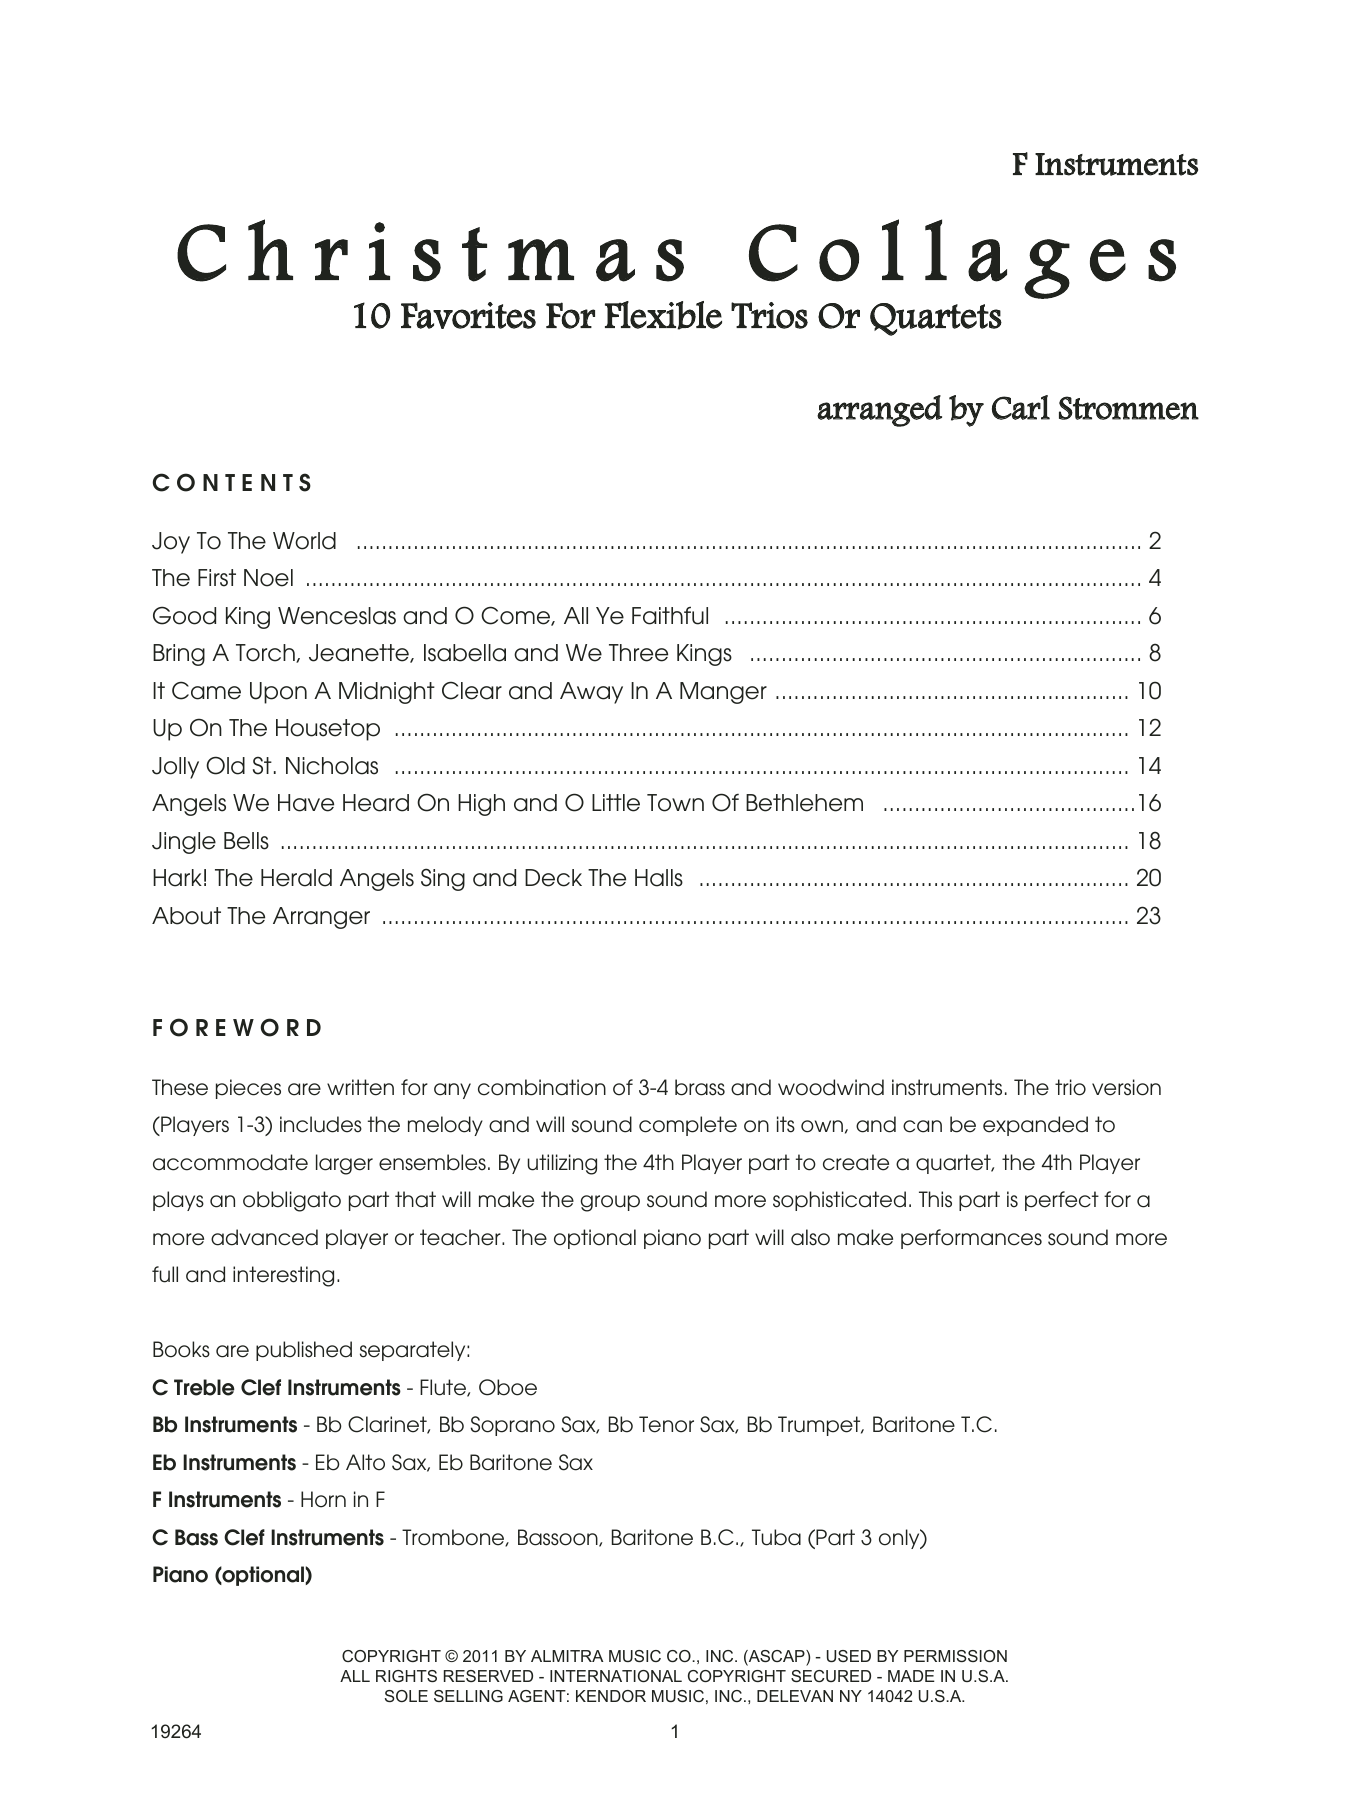 Download Strommen Christmas Collages - F Instruments Sheet Music